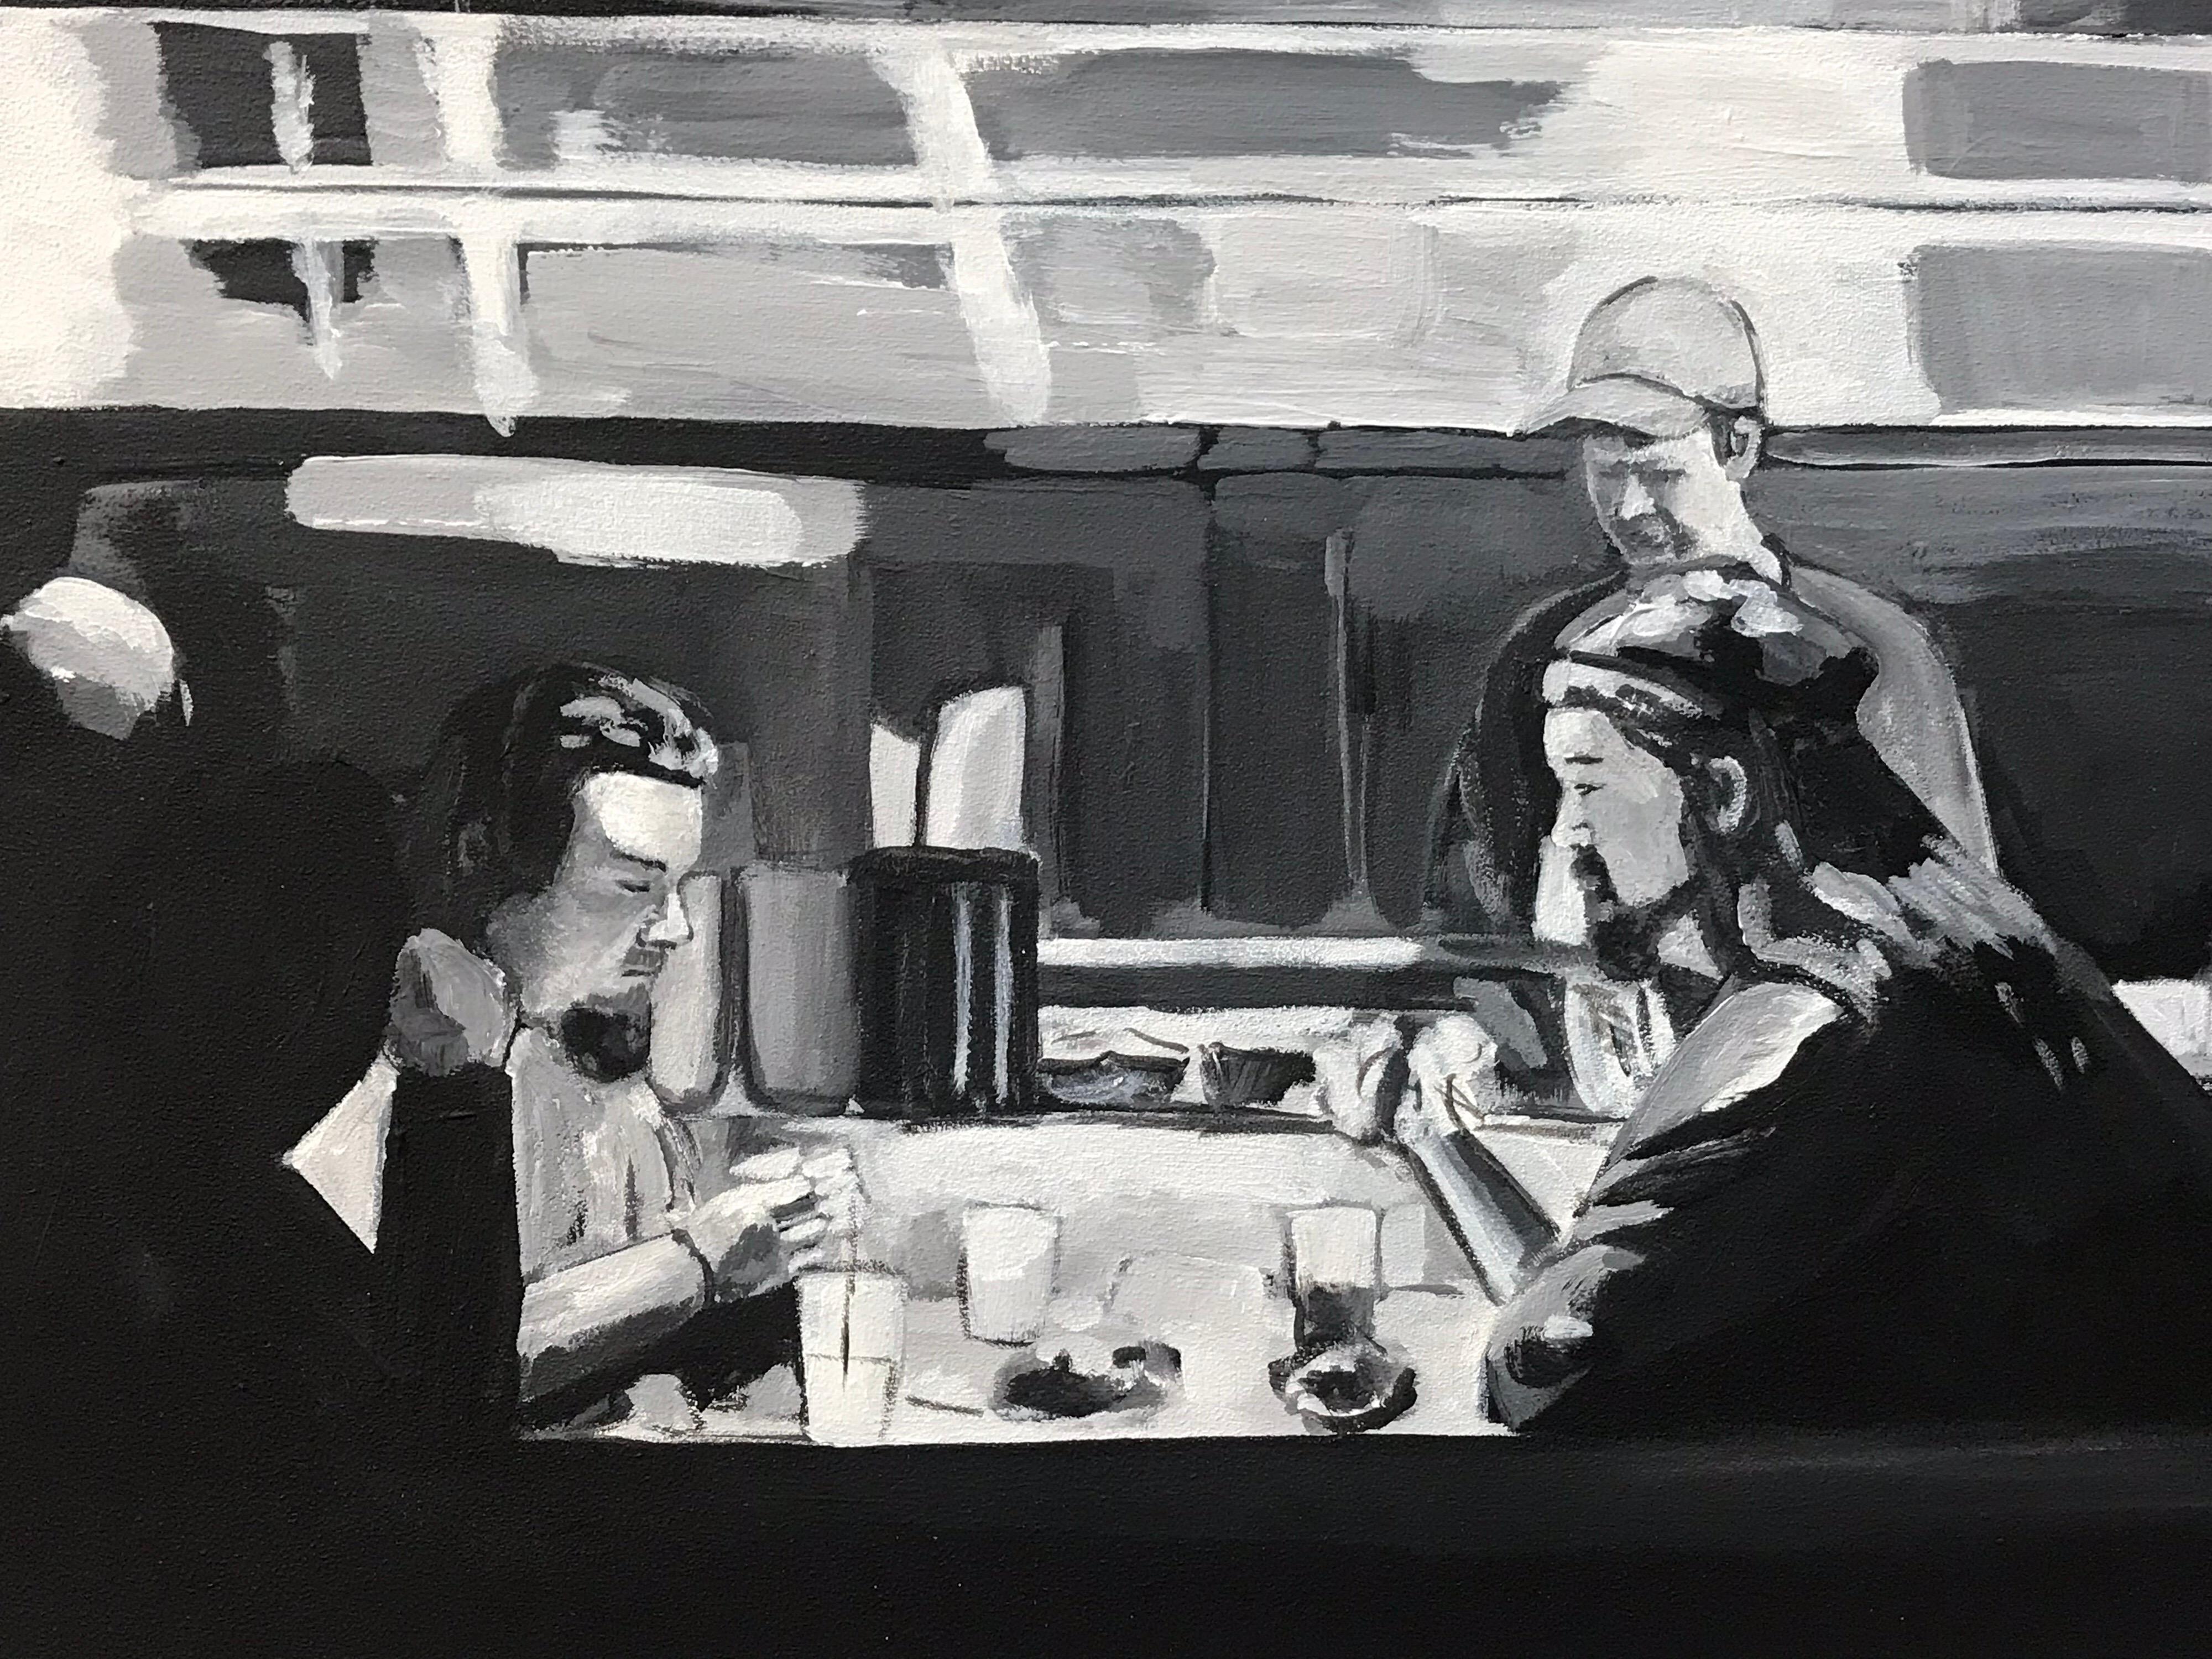 American Diner Americana Series USA by Leading British Urban Landscape Artist. Angela Wakefield has twice been on the front cover of ‘Art of England’ and featured in ARTnews, attracting international attention and critical acclaim with her urban